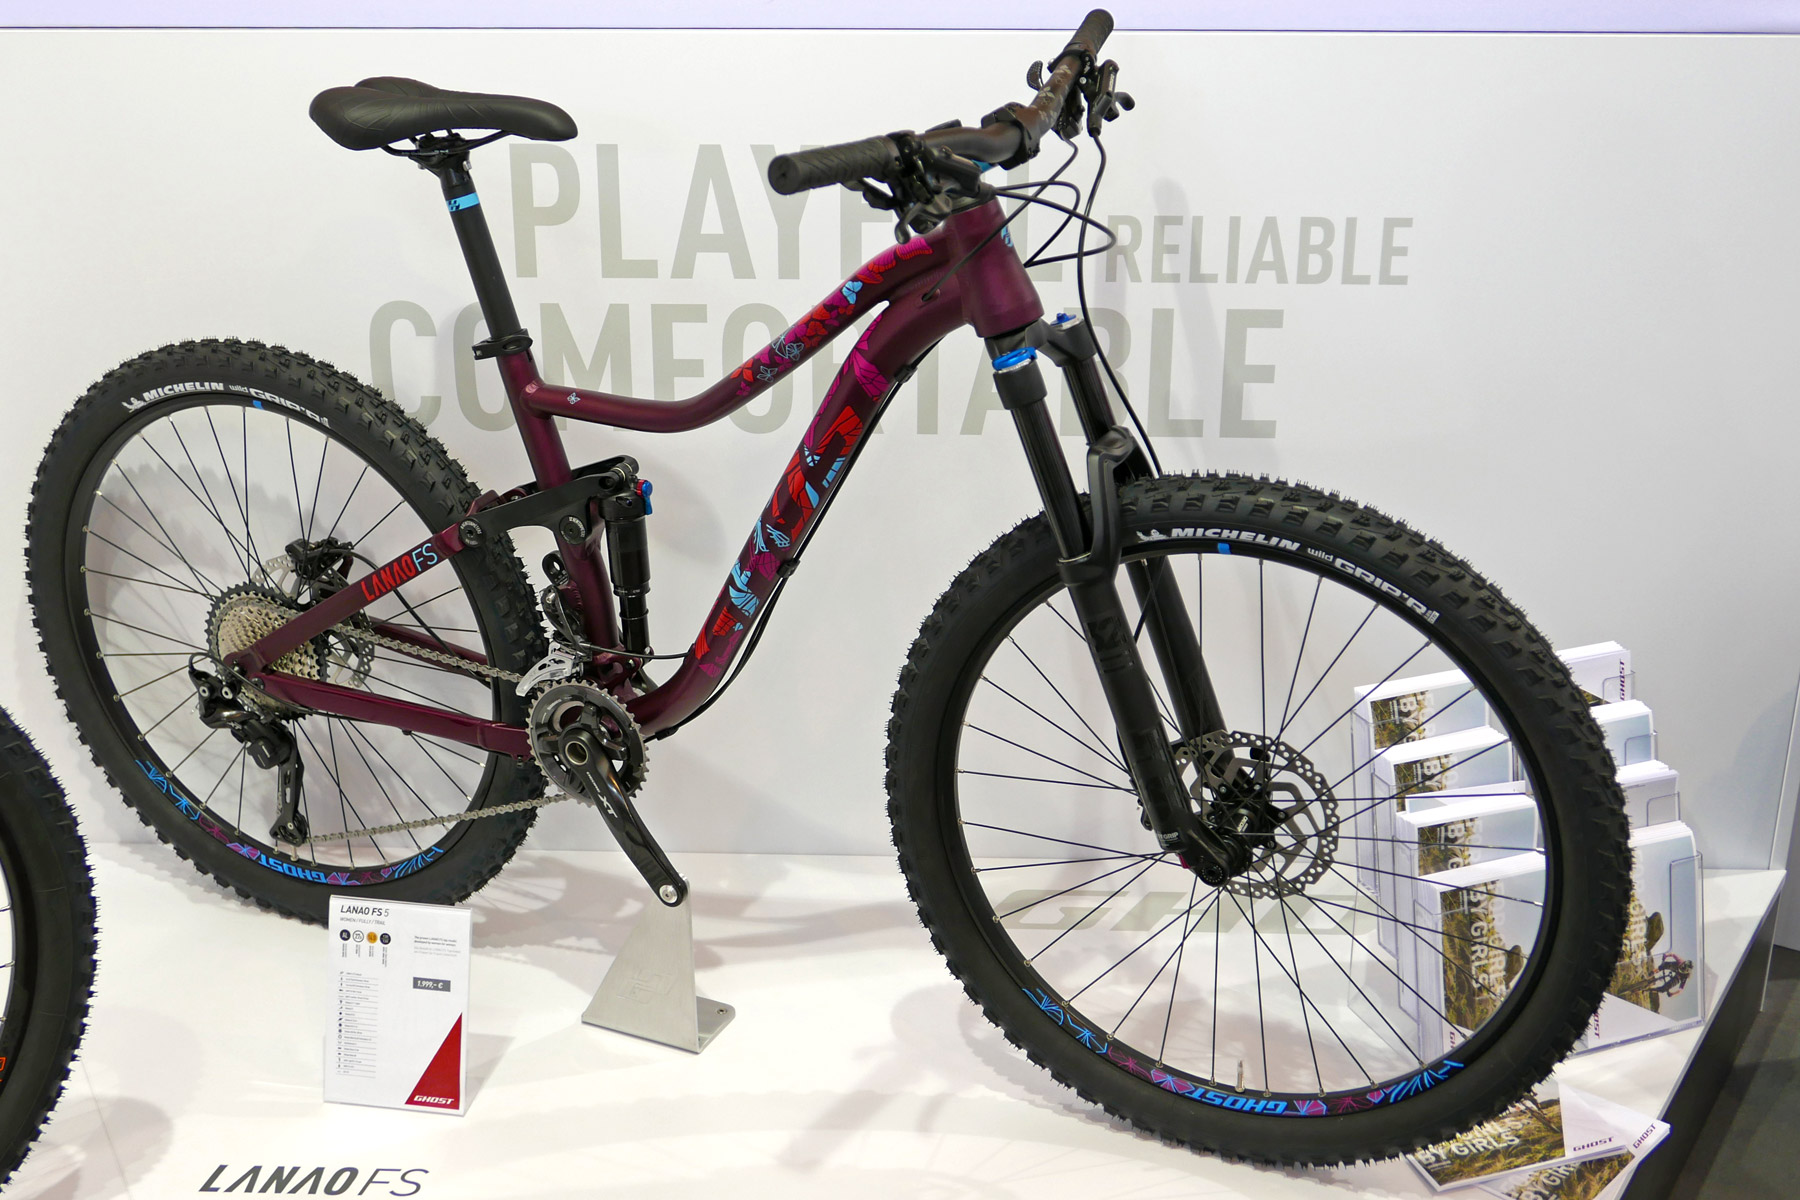 EB16: Trail bikes by women for women with Ghost Dre AMR, Lanao & even e-MTB versions